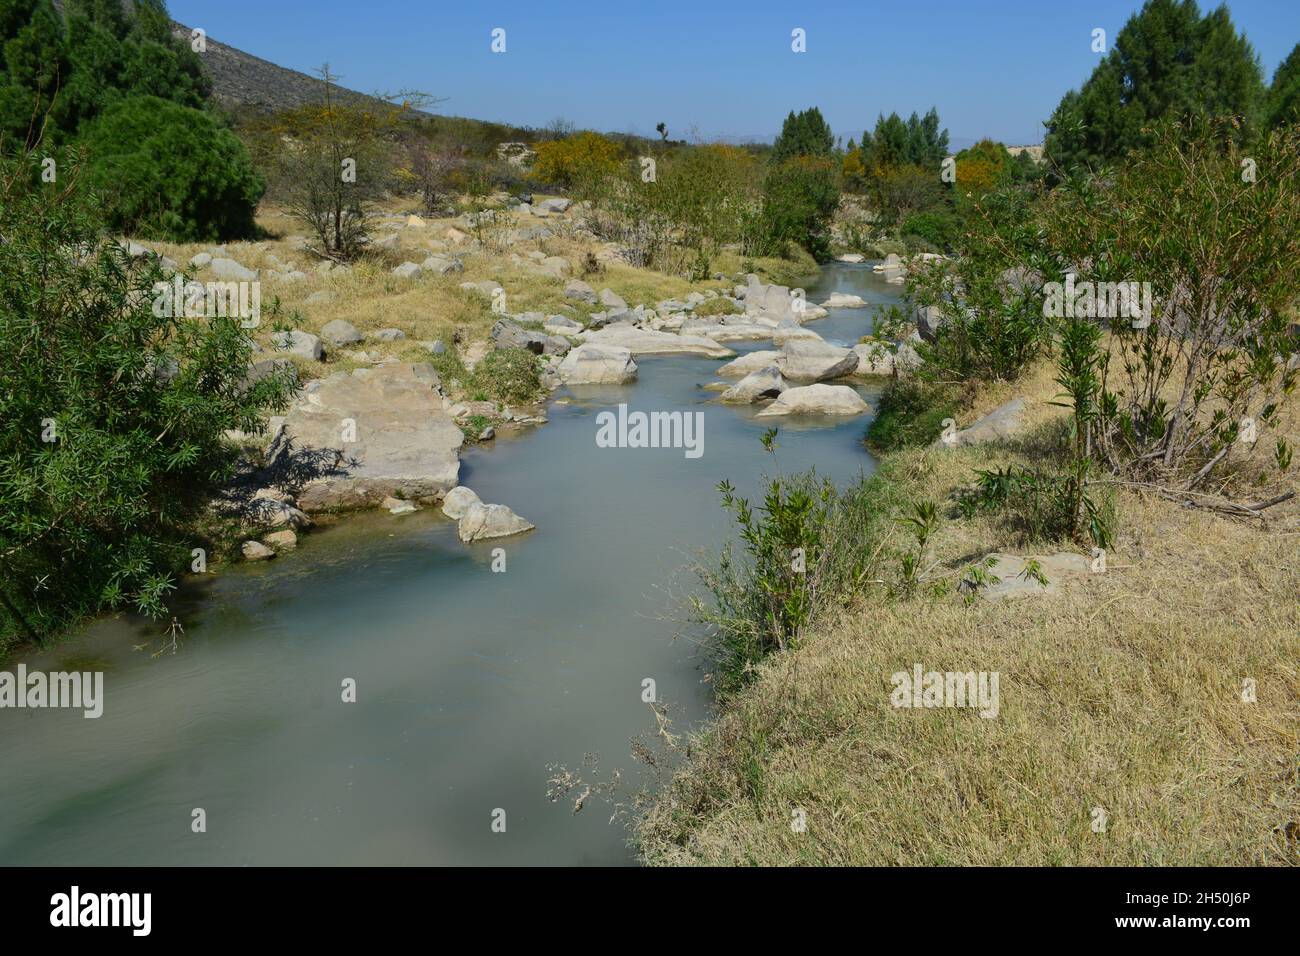 Polluted river and almost dry. North of Mexico. Stock Photo